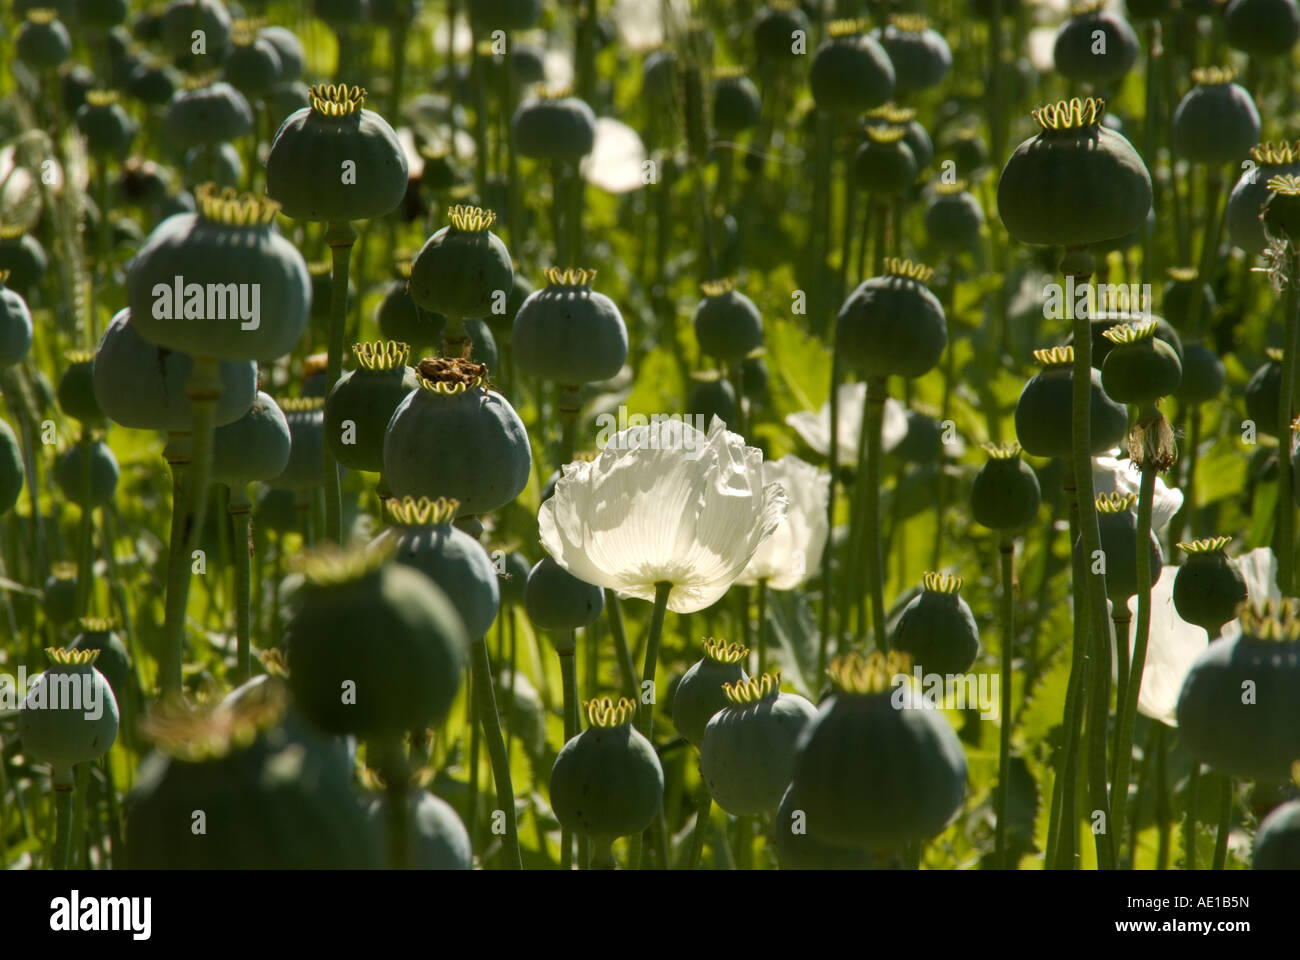 Opium poppies growing in legally controlled field in central Anatolia, Turkey Stock Photo